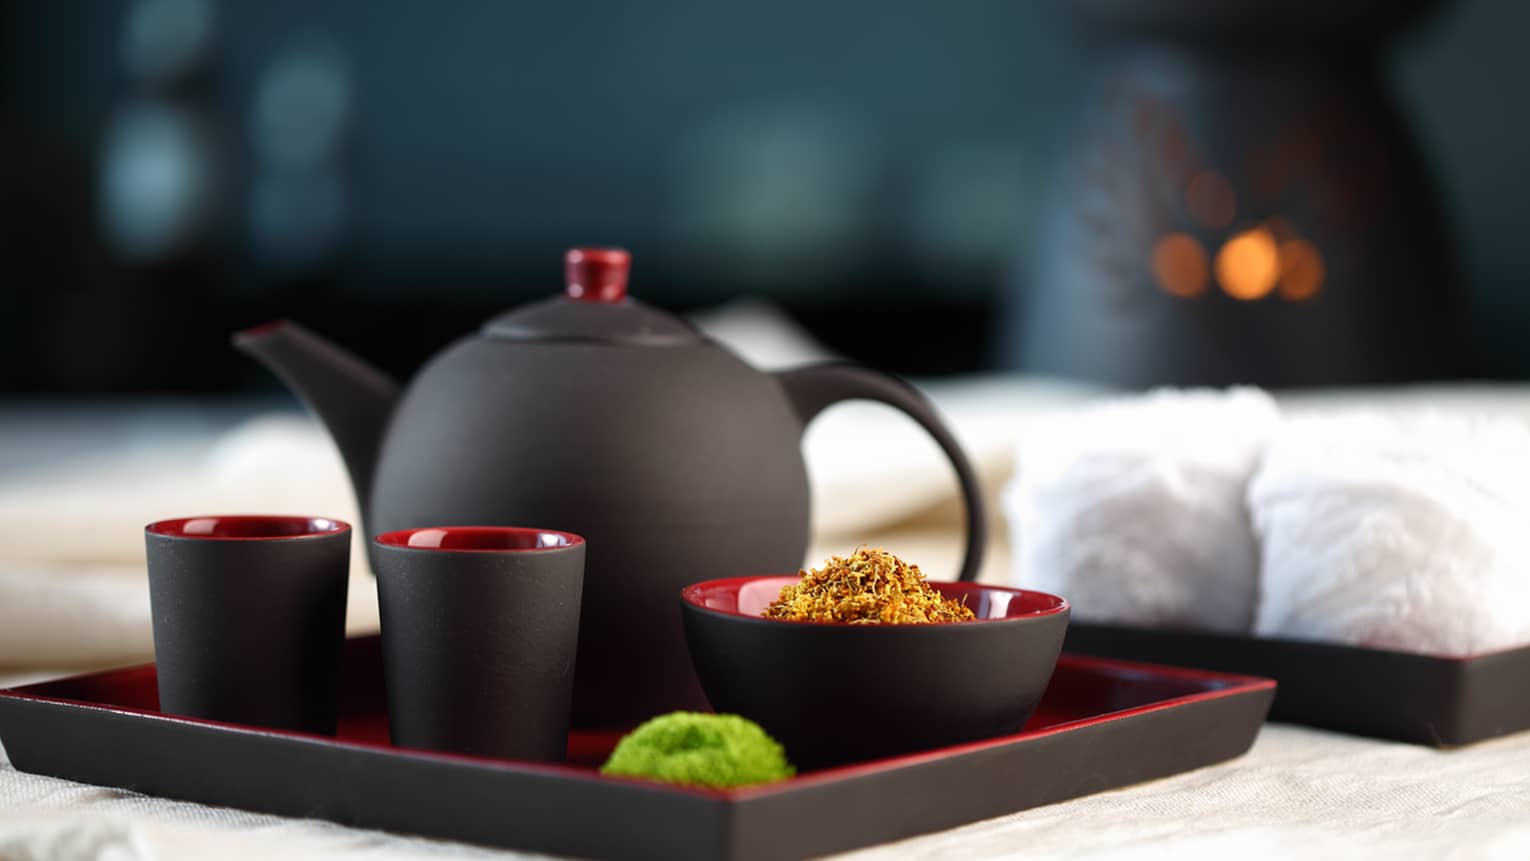 Black-and-red modern teapot with two mugs and bowl of loose-leaf chamomile on serving tray